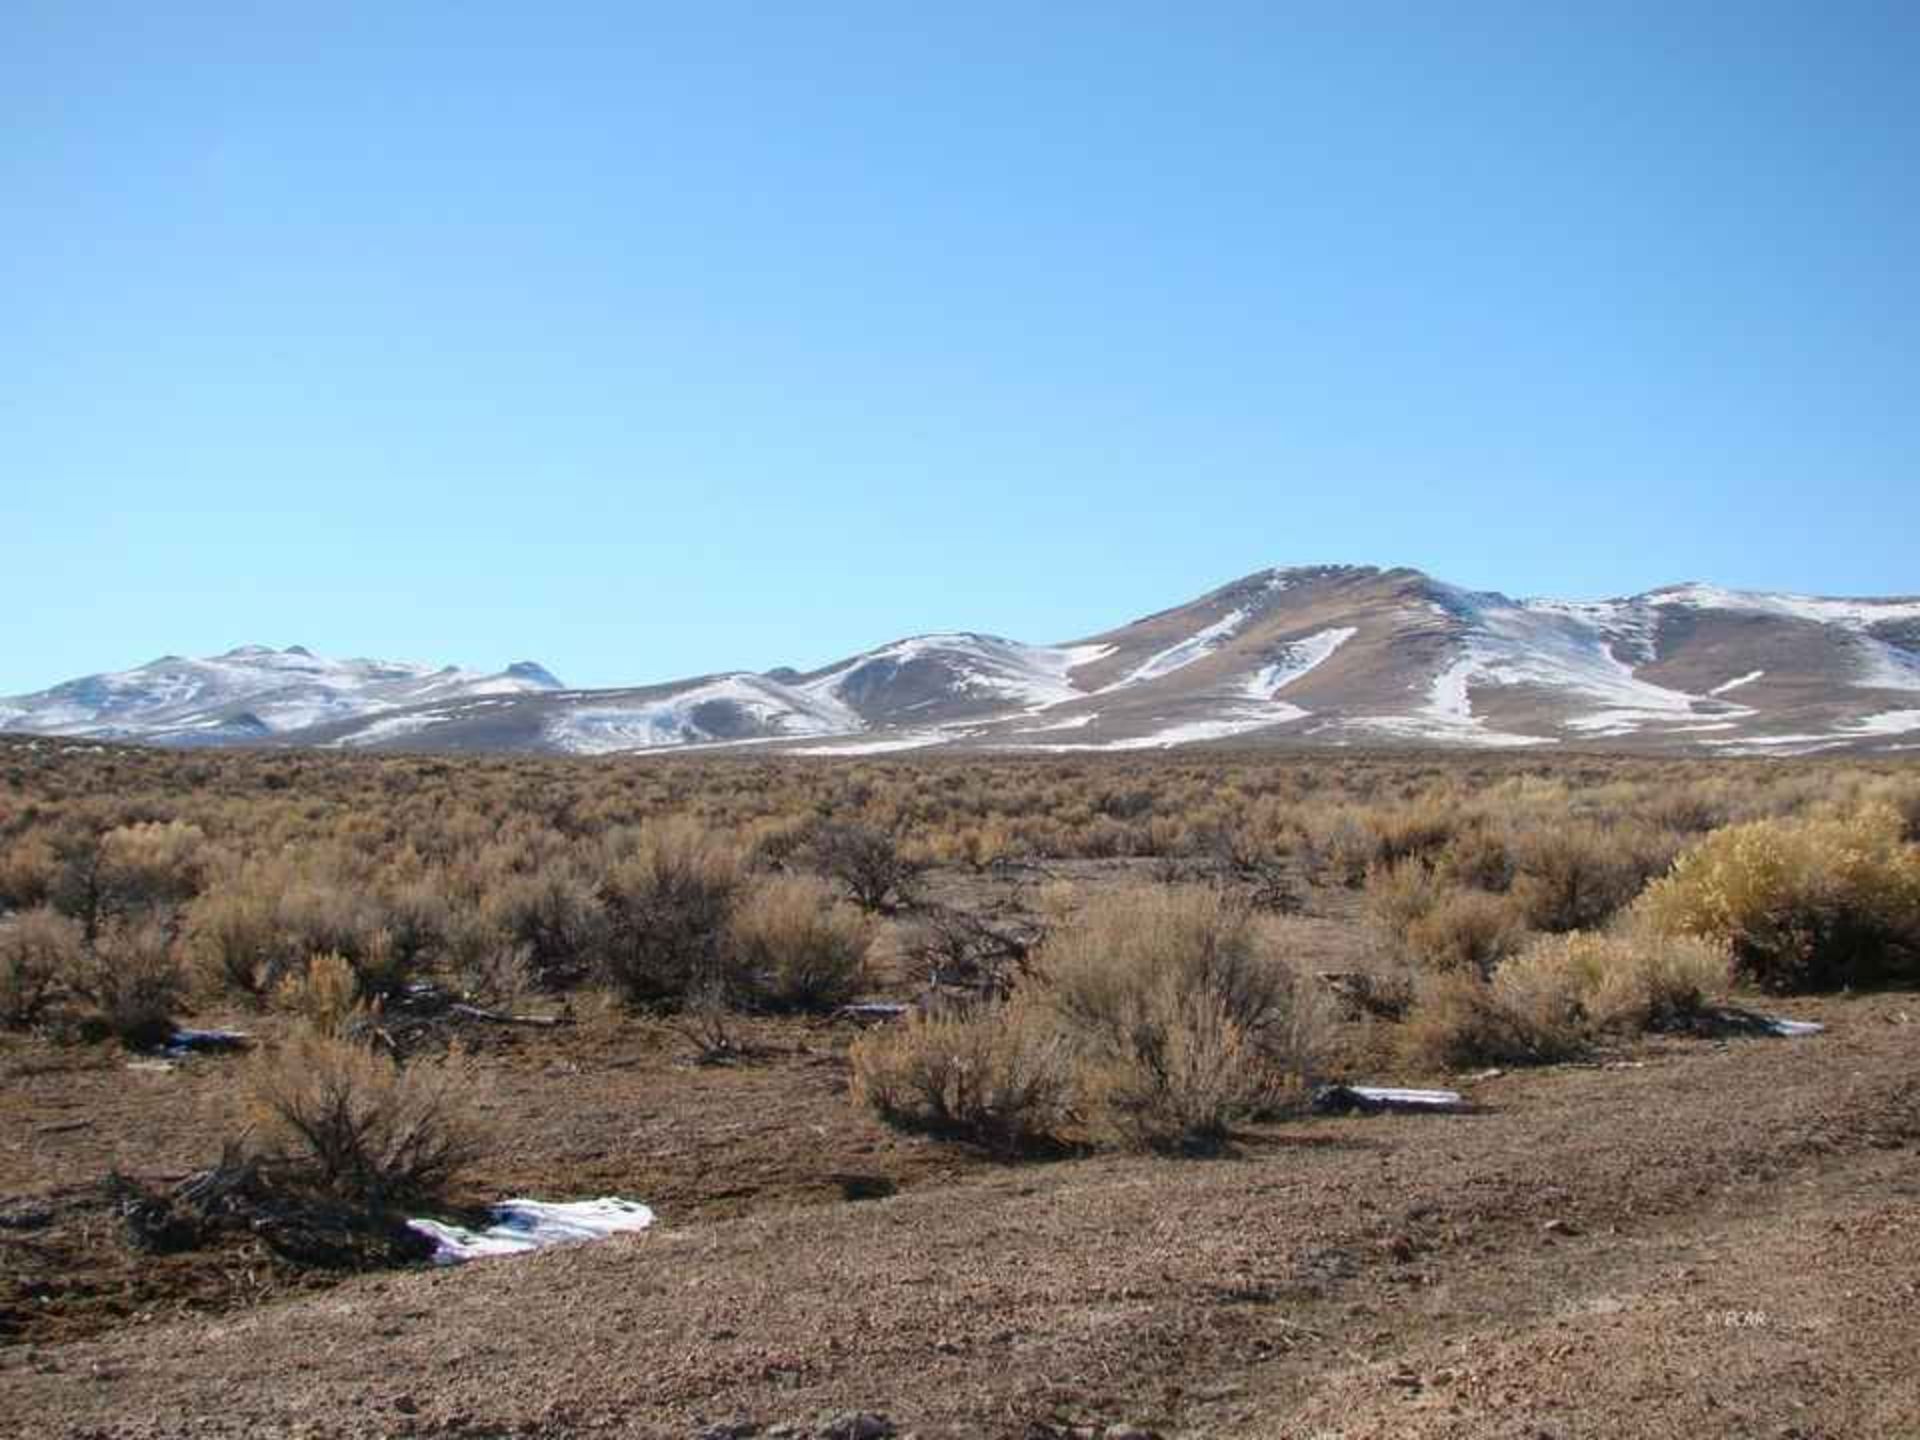 Be Surrounded by the Rugged, Natural Landscape of Nevada! - Image 6 of 14